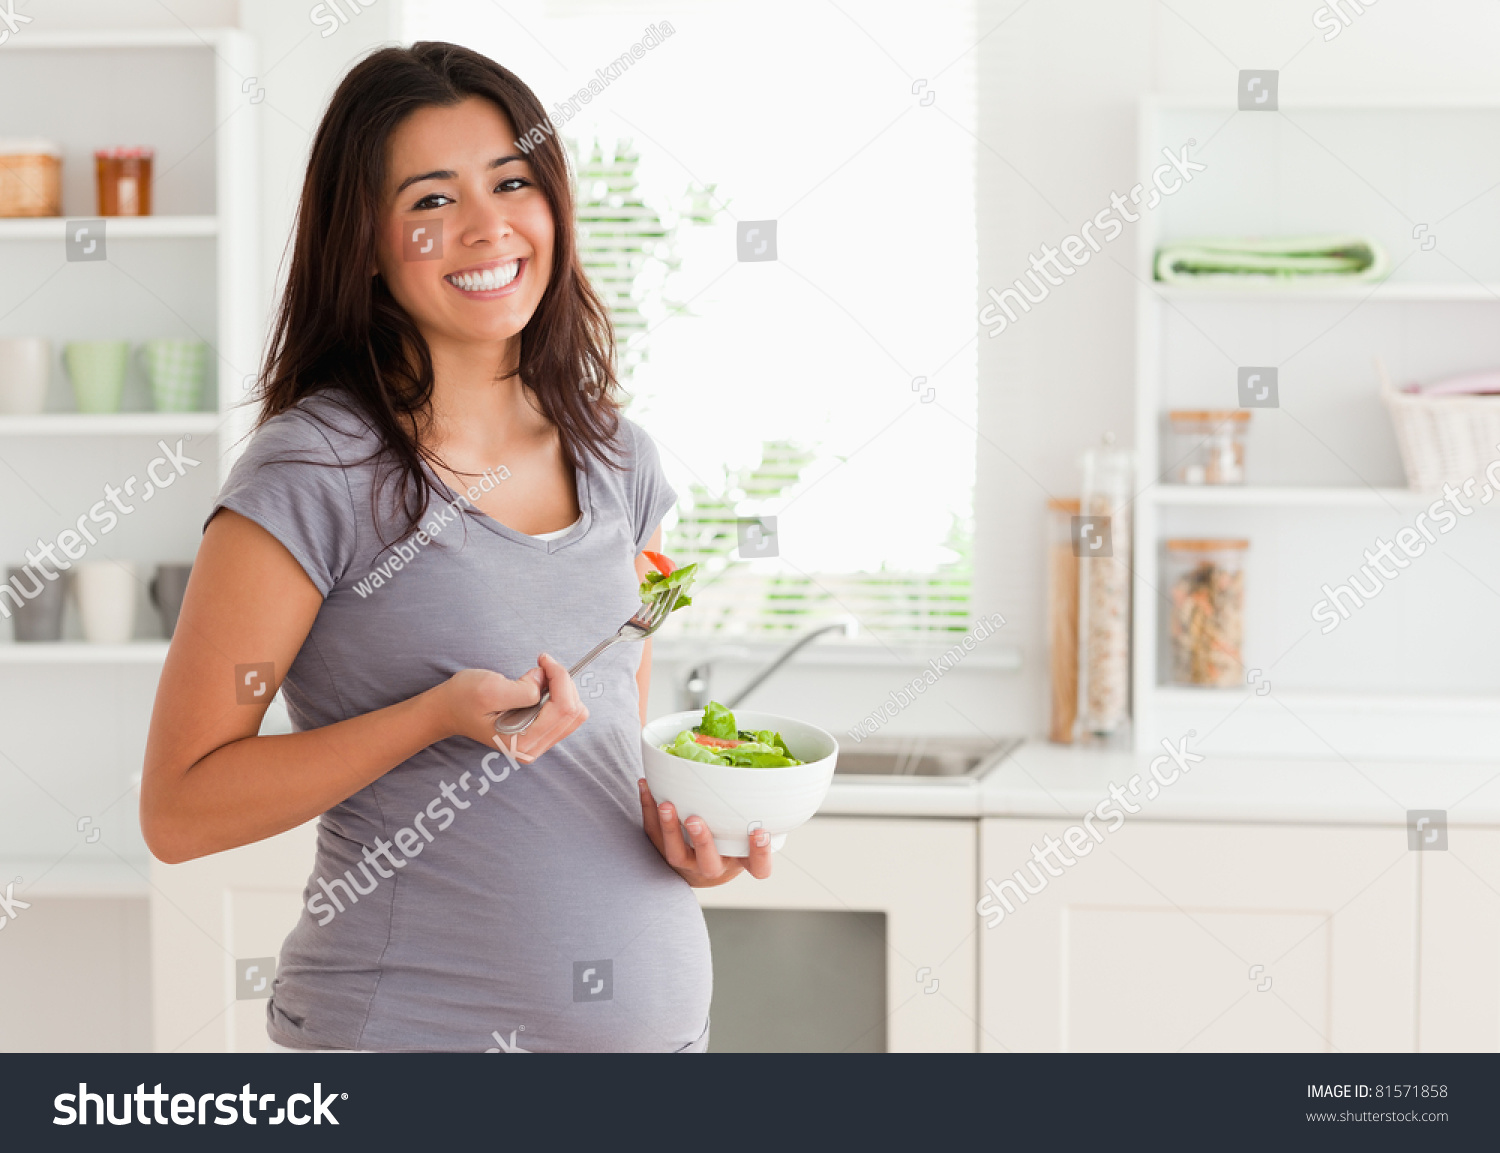 Can I Bowl While Pregnant 20